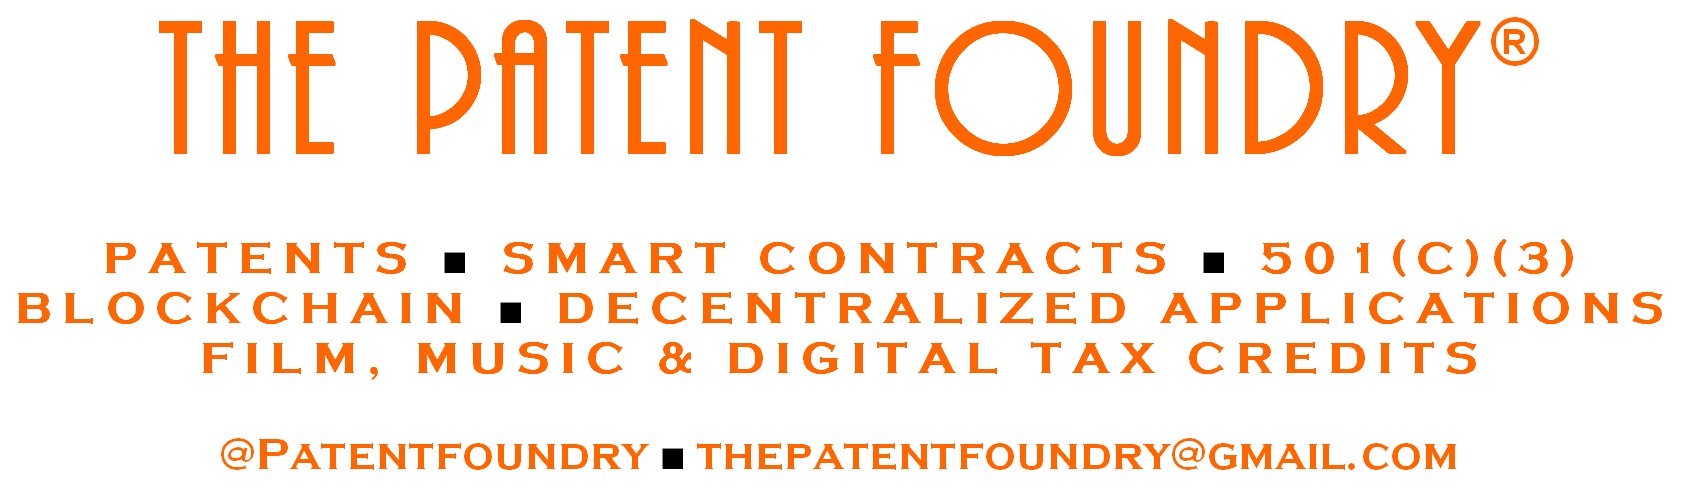 The Patent Foundry